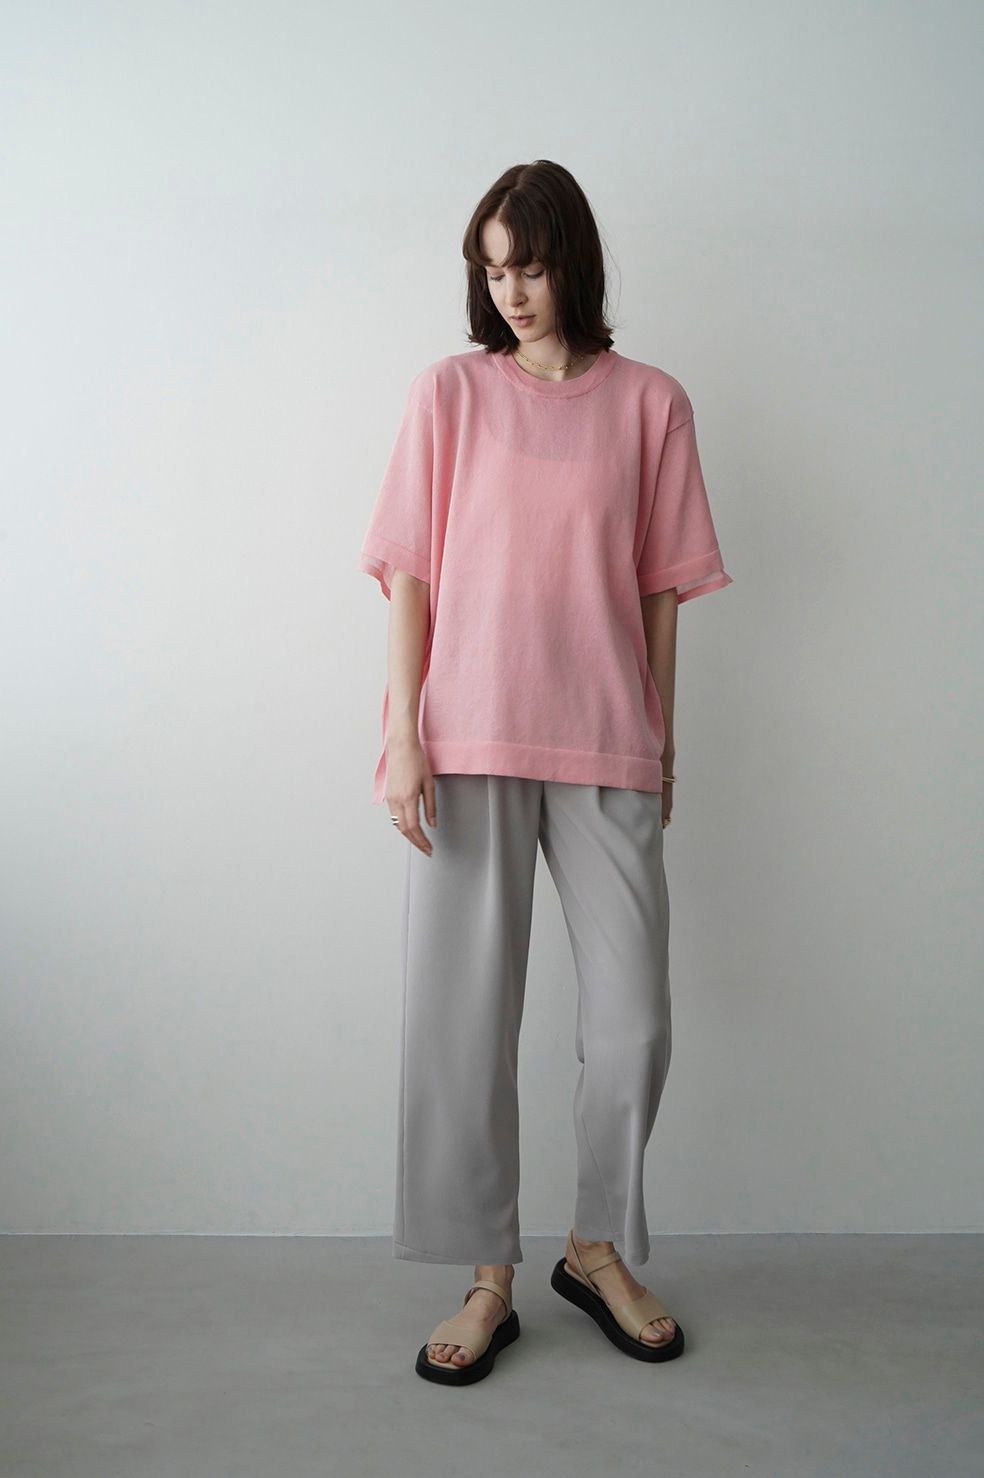 CLANE - シアー スクエア ニット トップス - SHEER SQUARE KNIT TOPS